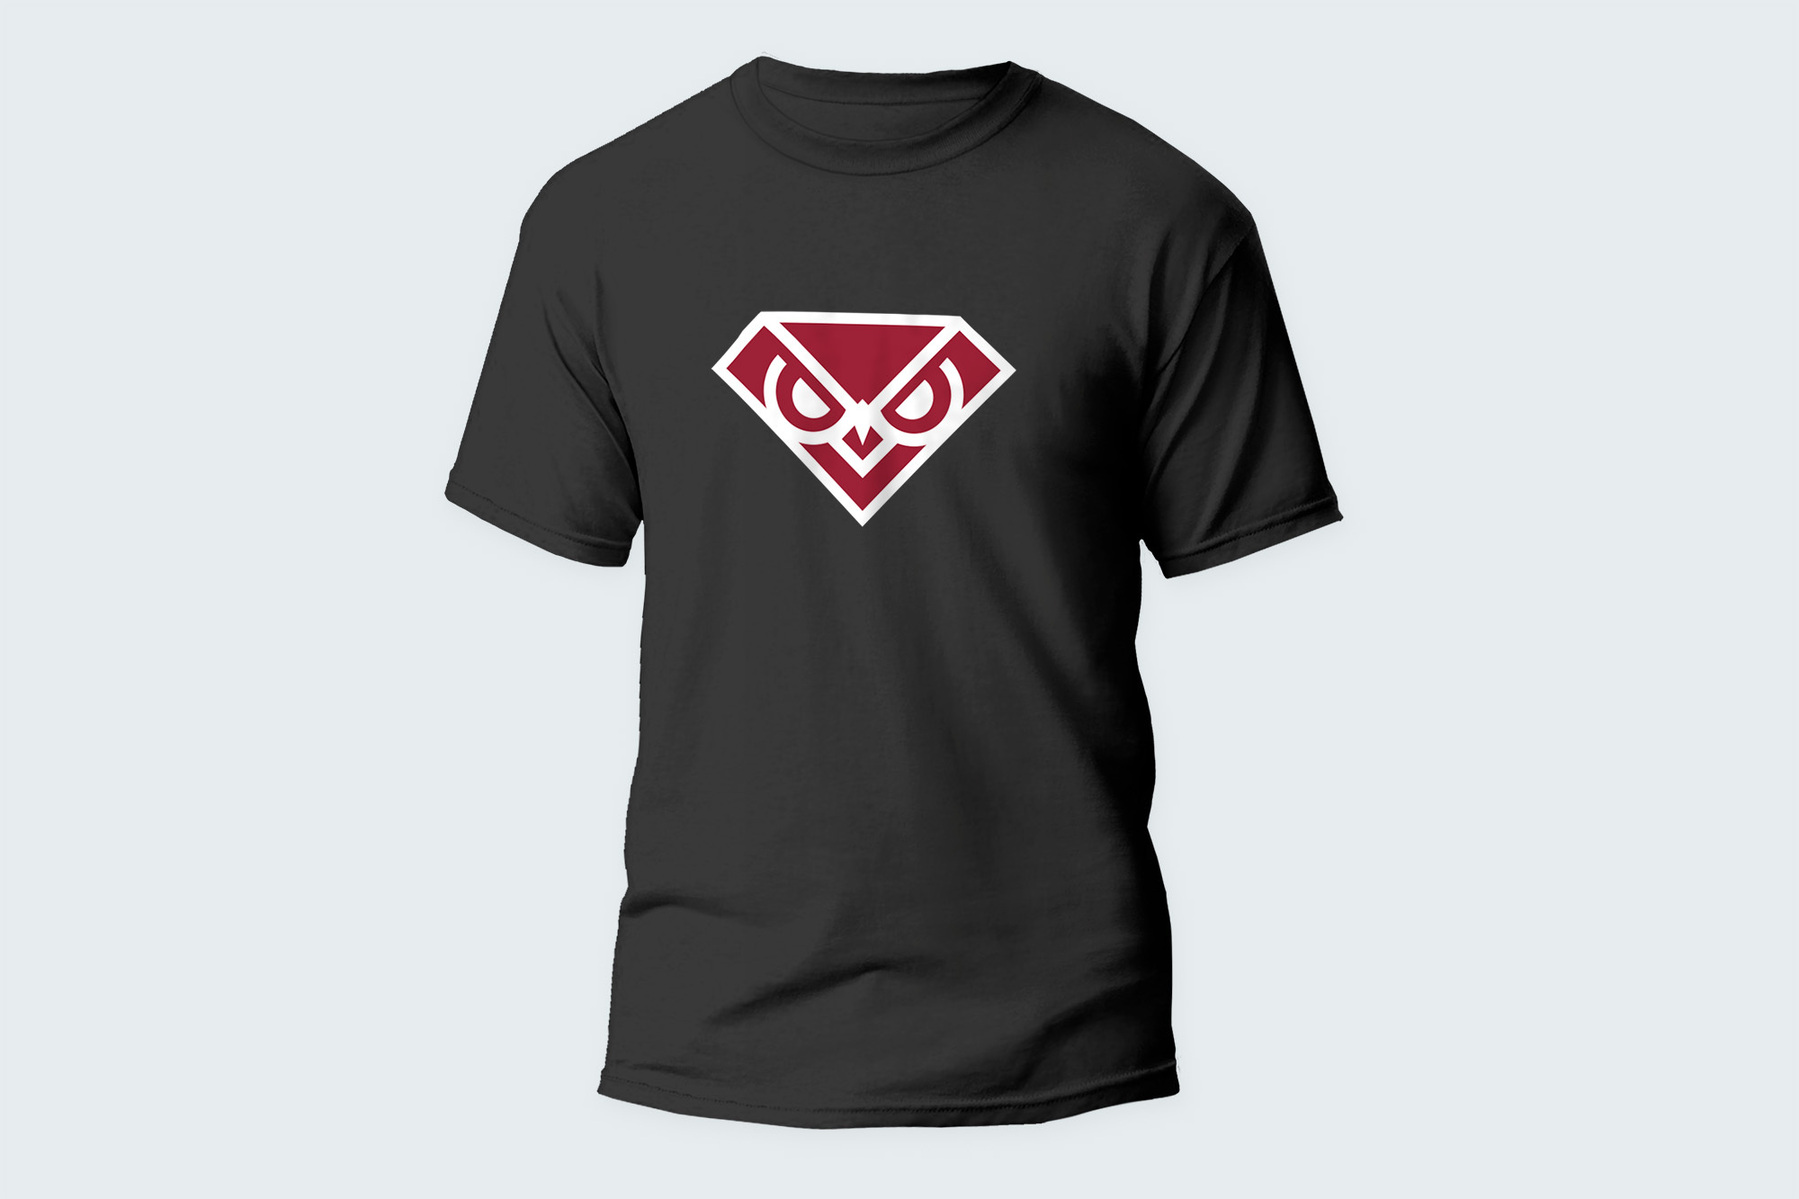 Proposed Temple Owl logo on t shirt